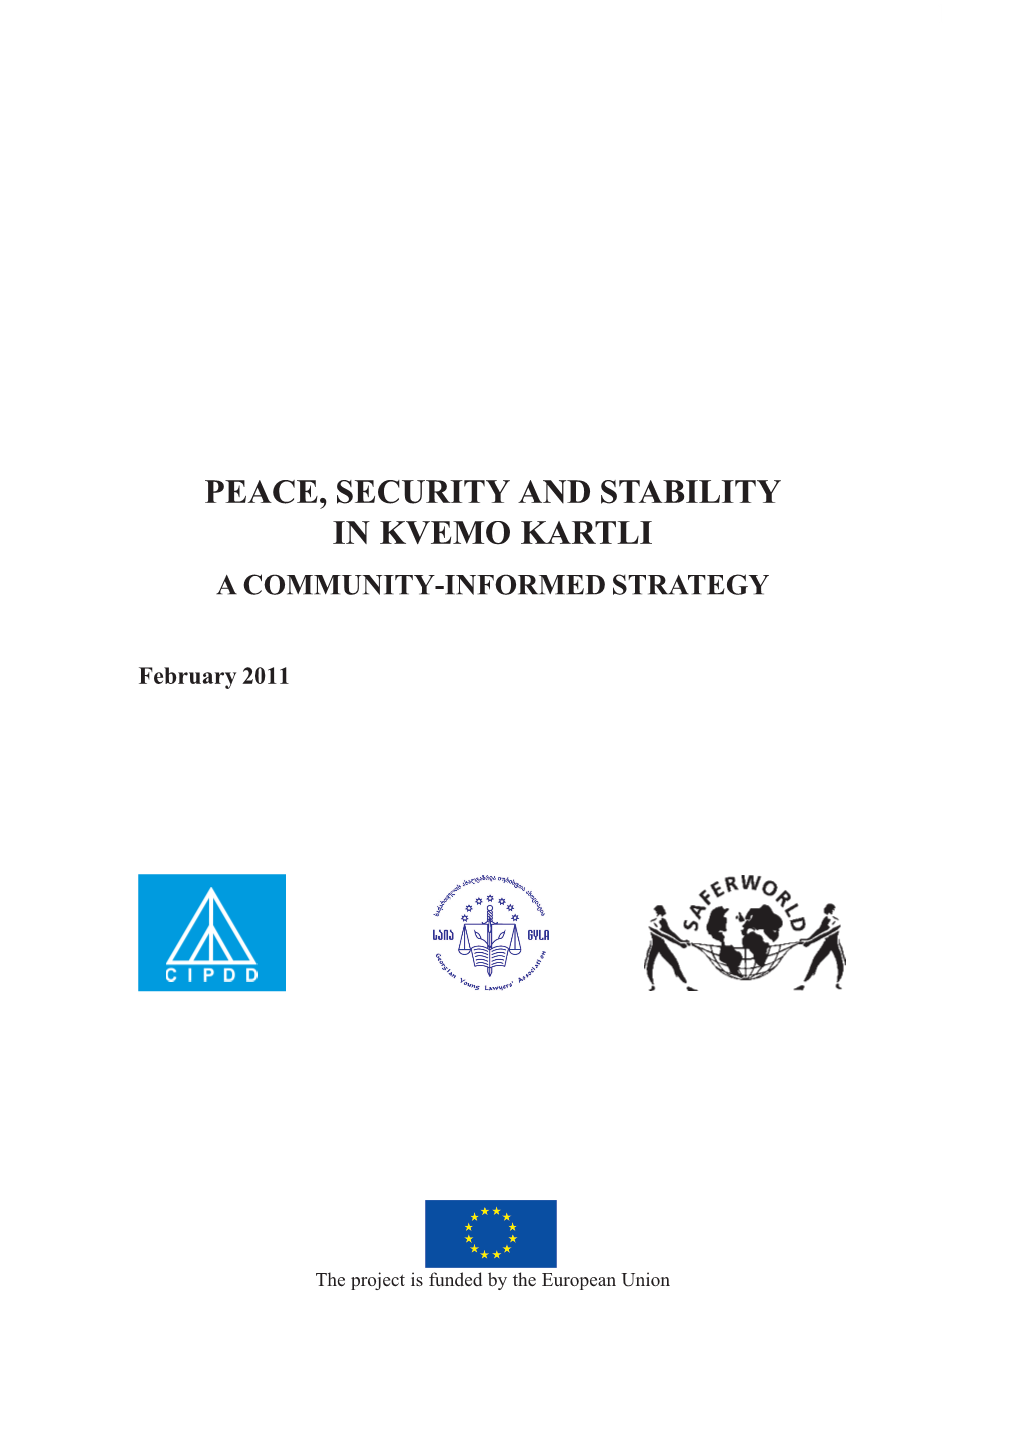 Peace, Security and Stability in Kvemo Kartli a Community-Informed Strategy